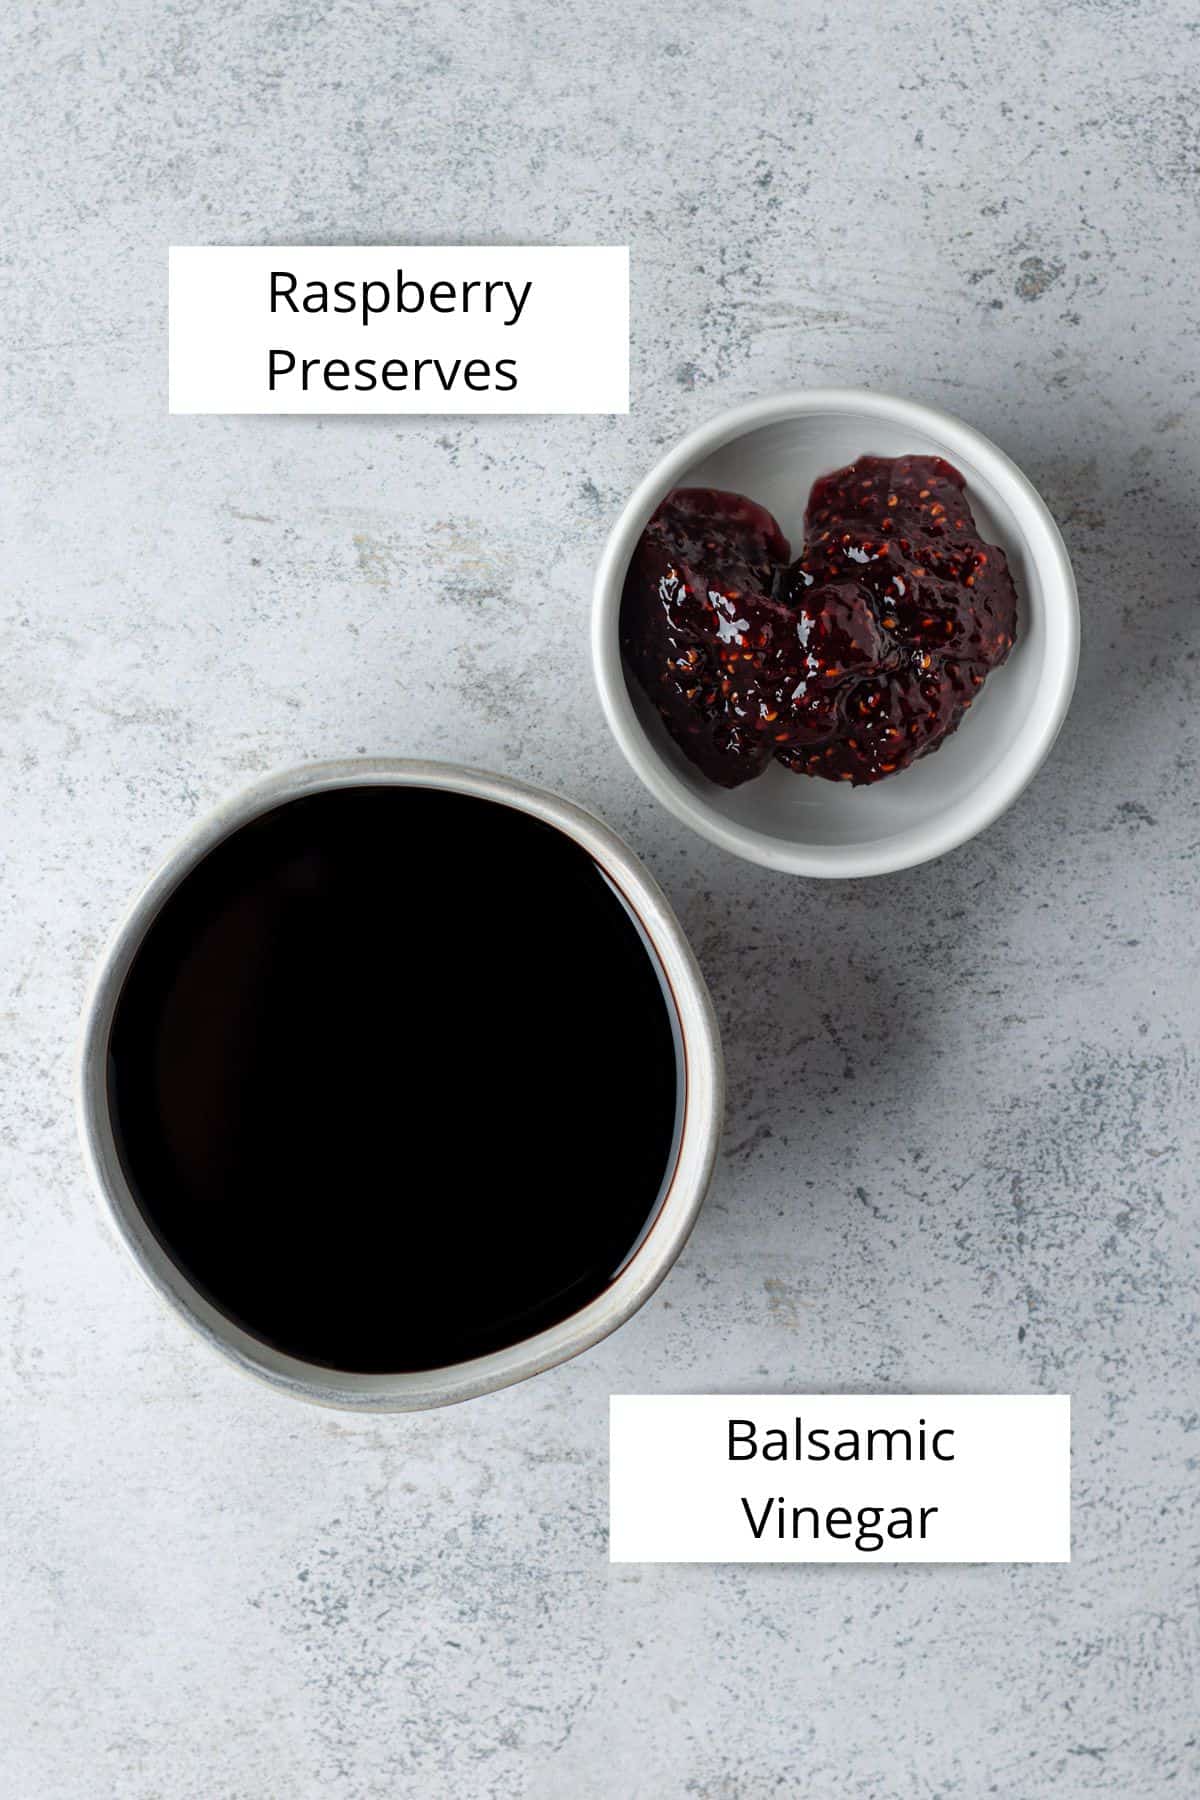 A small white bowl filled with raspberry preserves and a small grey bowl filled with balsamic vinegar.